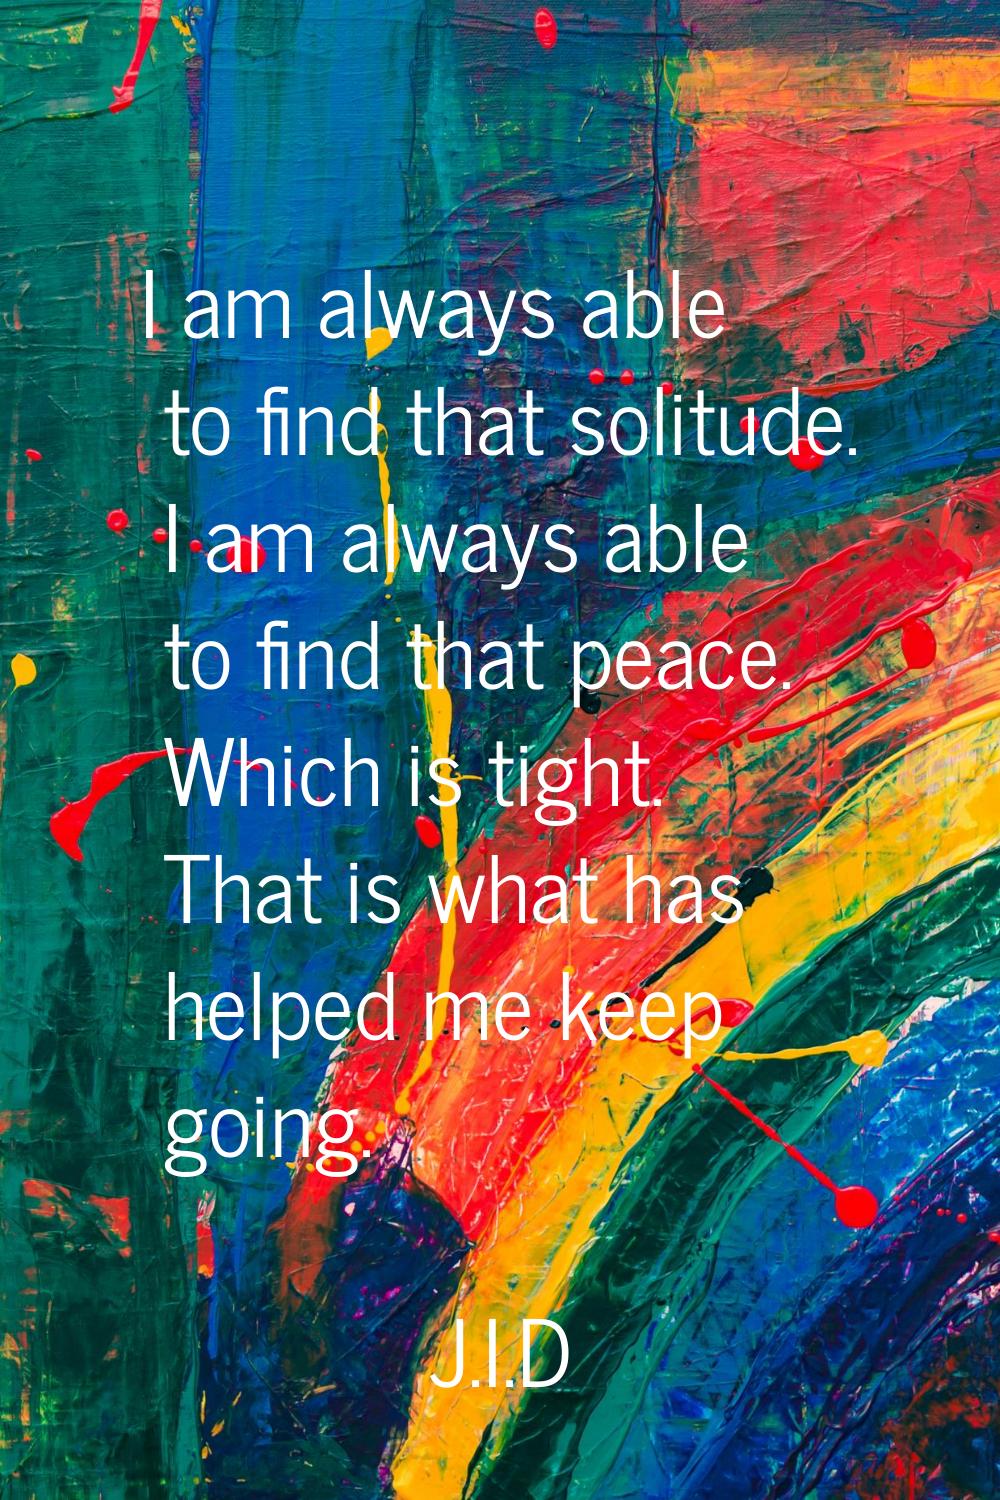 I am always able to find that solitude. I am always able to find that peace. Which is tight. That i